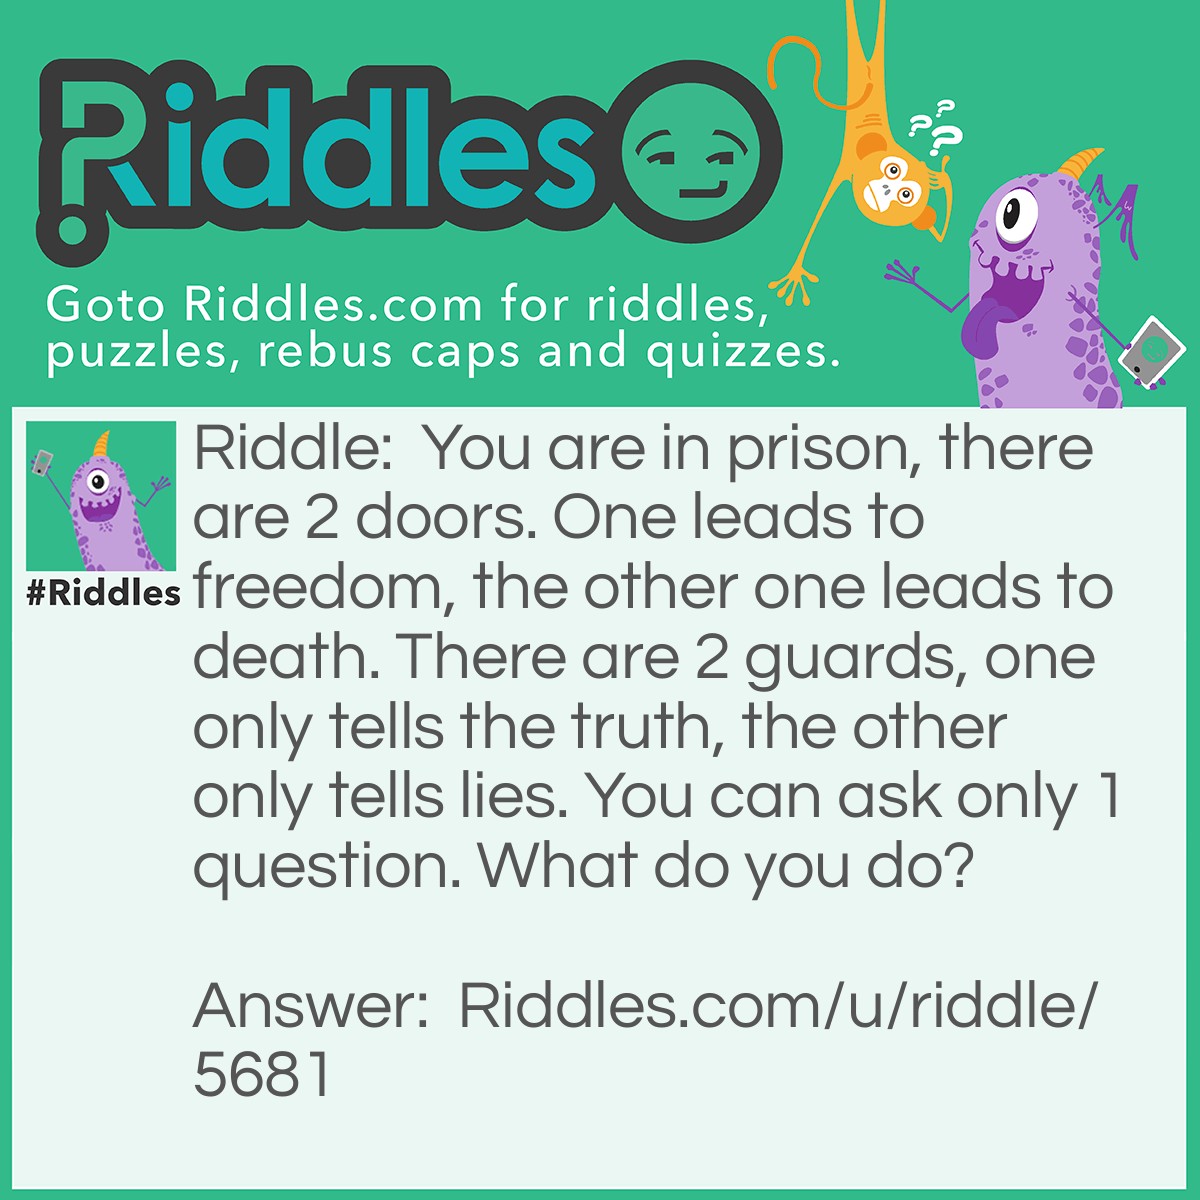 Riddle: You are in prison, there are 2 doors. One leads to freedom, the other one leads to death. There are 2 guards, one only tells the truth, the other only tells lies. You can ask only 1 question. What do you do? Answer: My teacher told me this riddle, if anyone has the answer please say it!